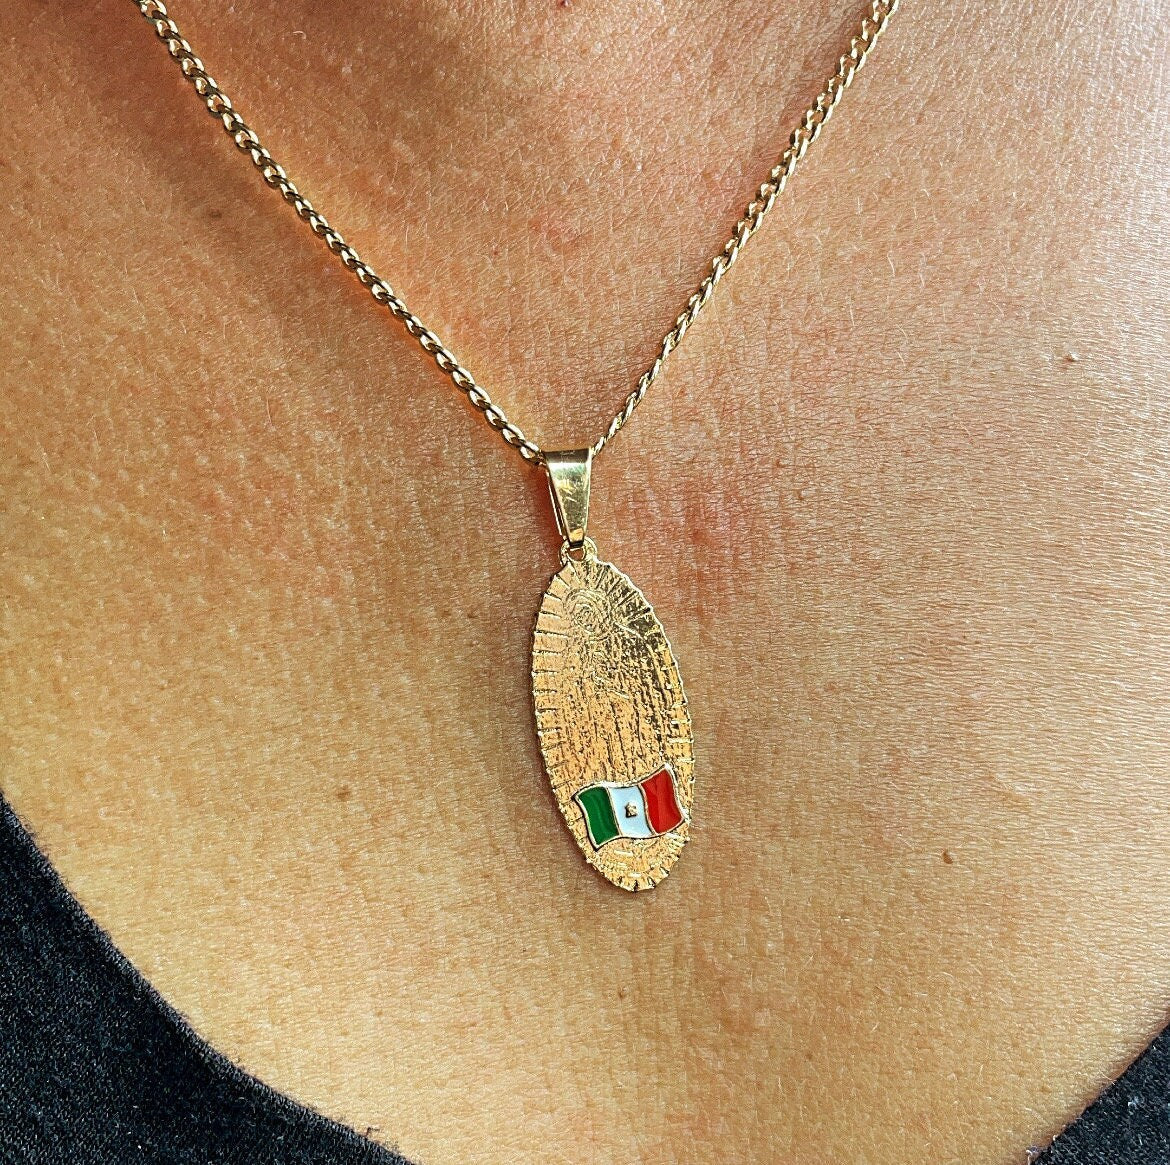 18k Gold Layered Oval Shaped Our Lady of Guadalupe Pendant Featuring Mexican Flag